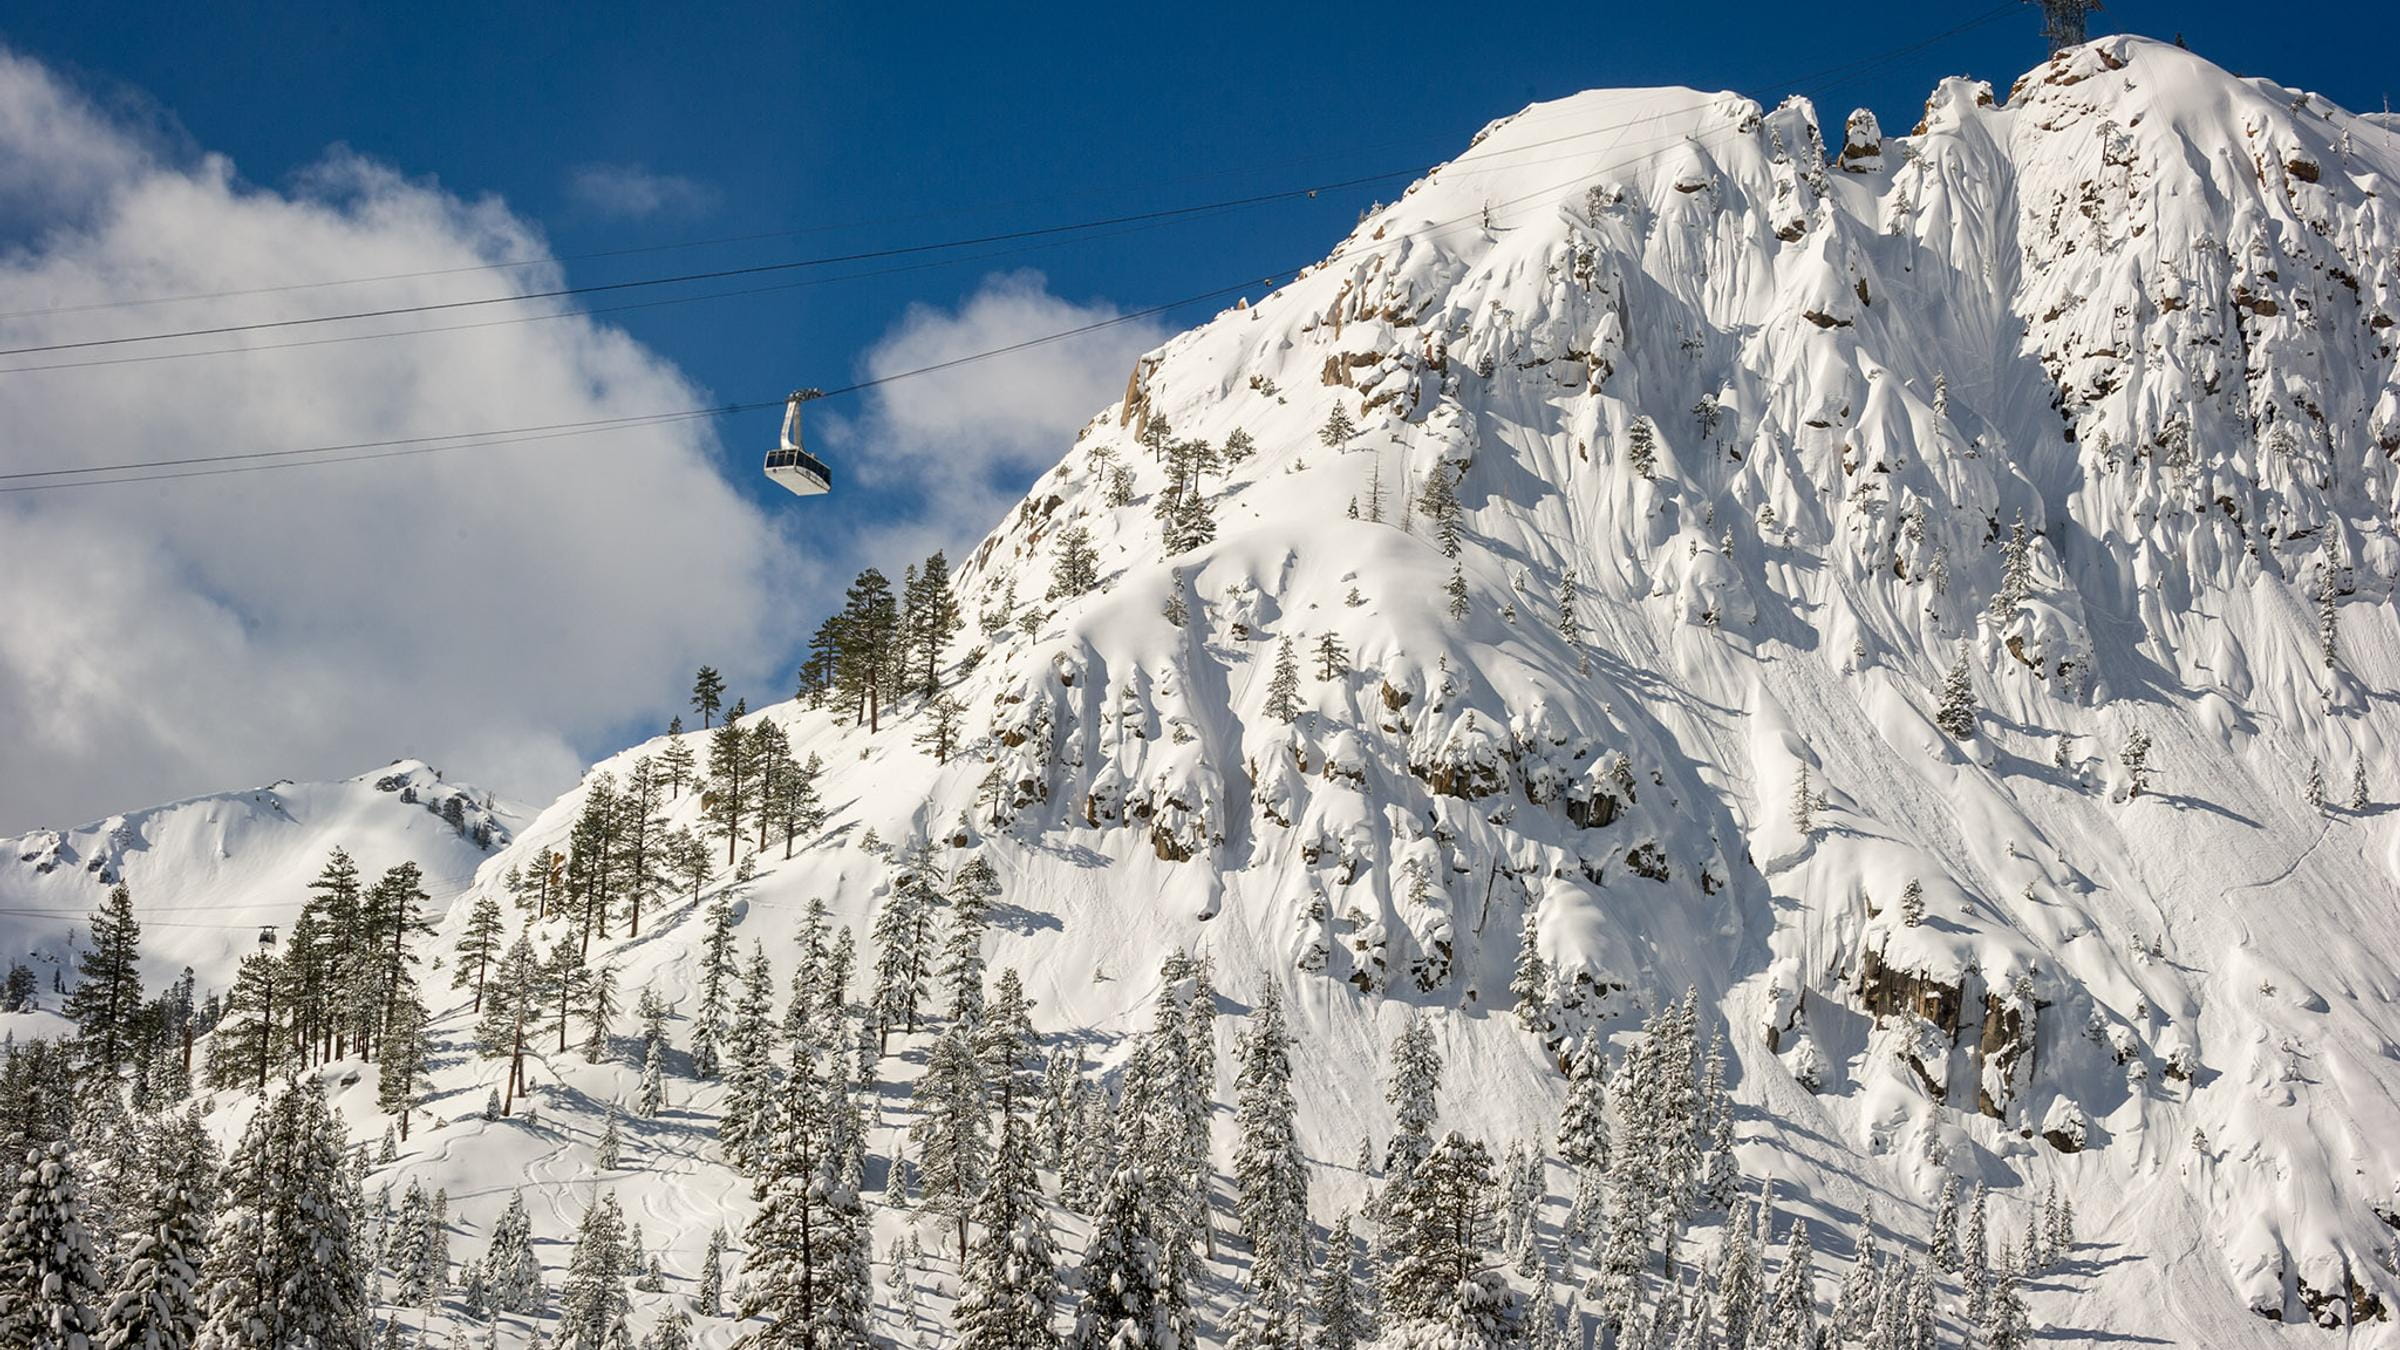 Aerial Tram scenic at Squaw Valley